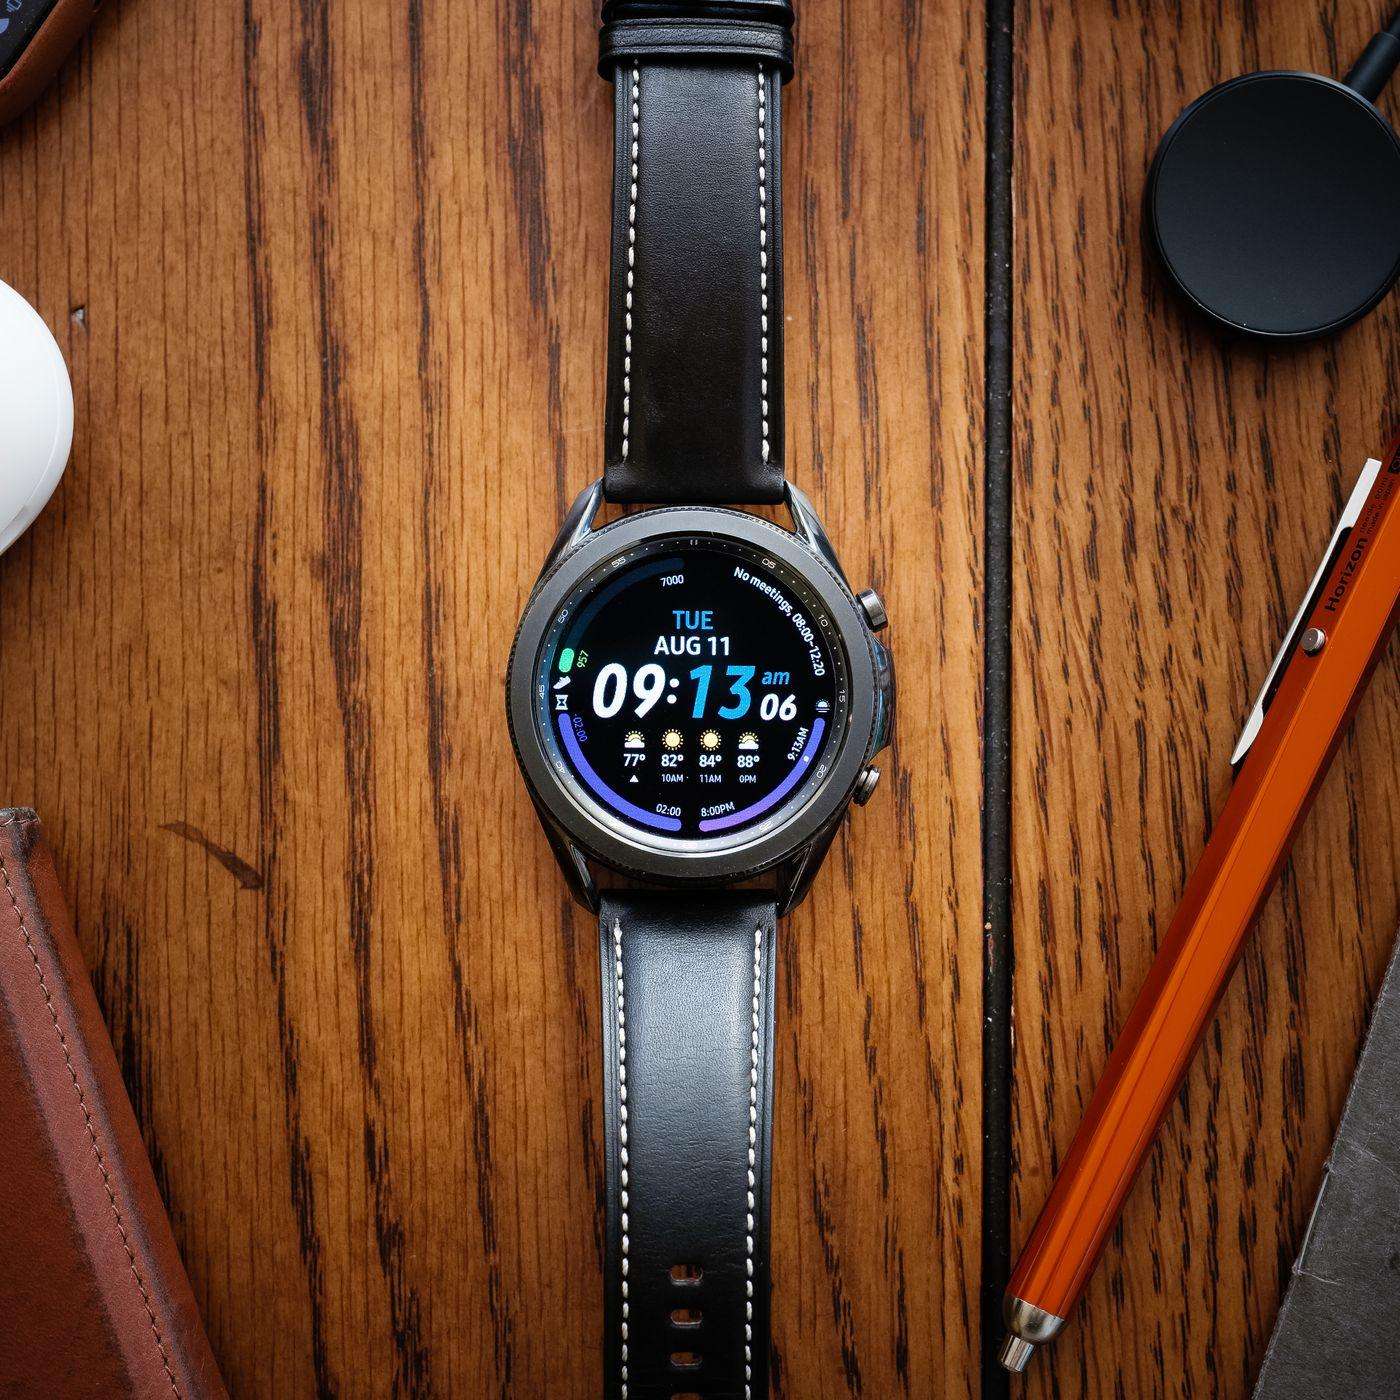 Instructions On How To Adjust The Time Of A Smartwatch, Simple And Accurate, Quickly